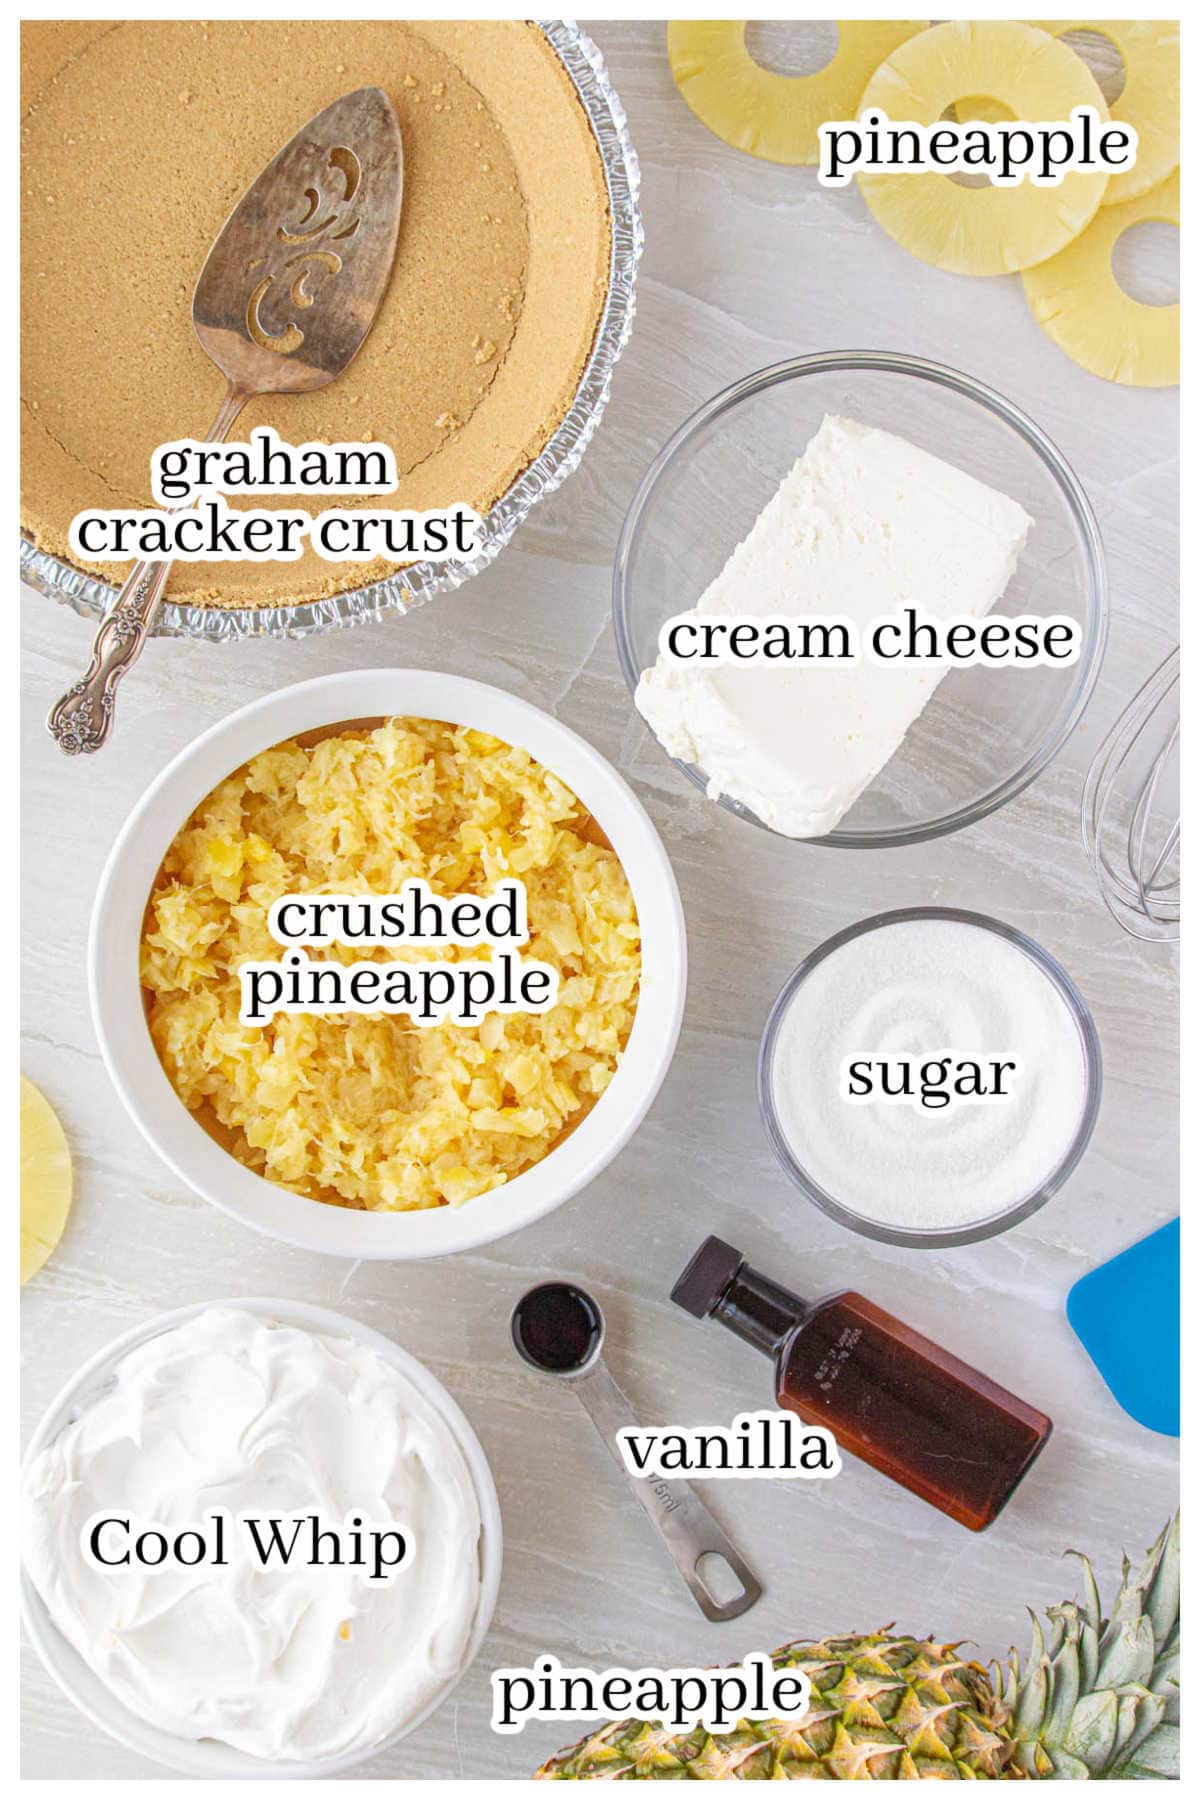 Ingredients to make the dessert, with print overlay.